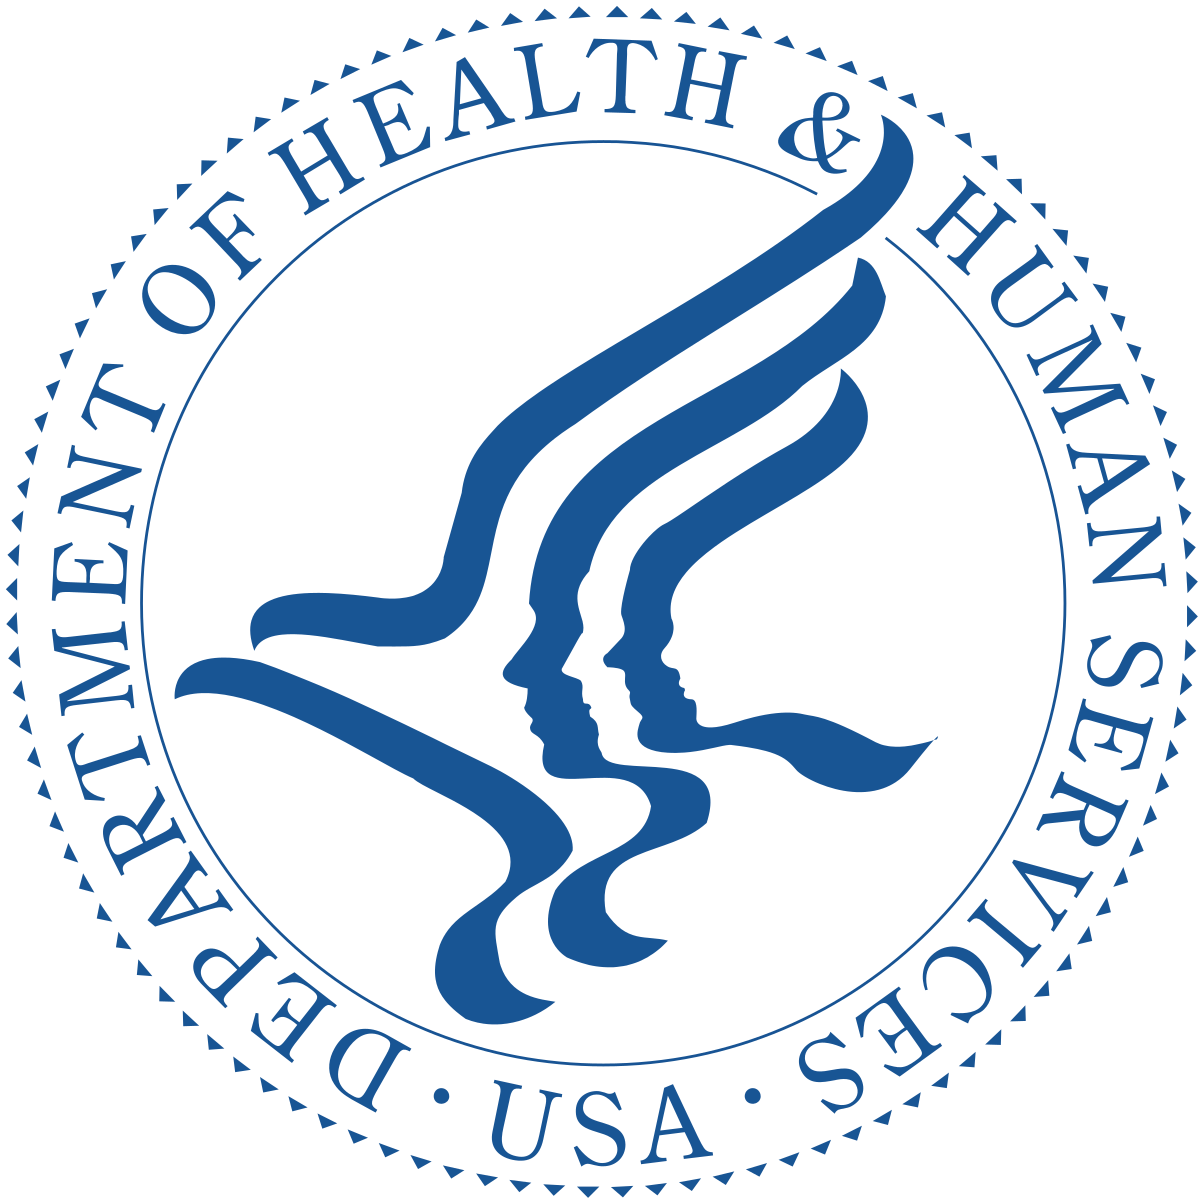 USS Department of Health and Human Services